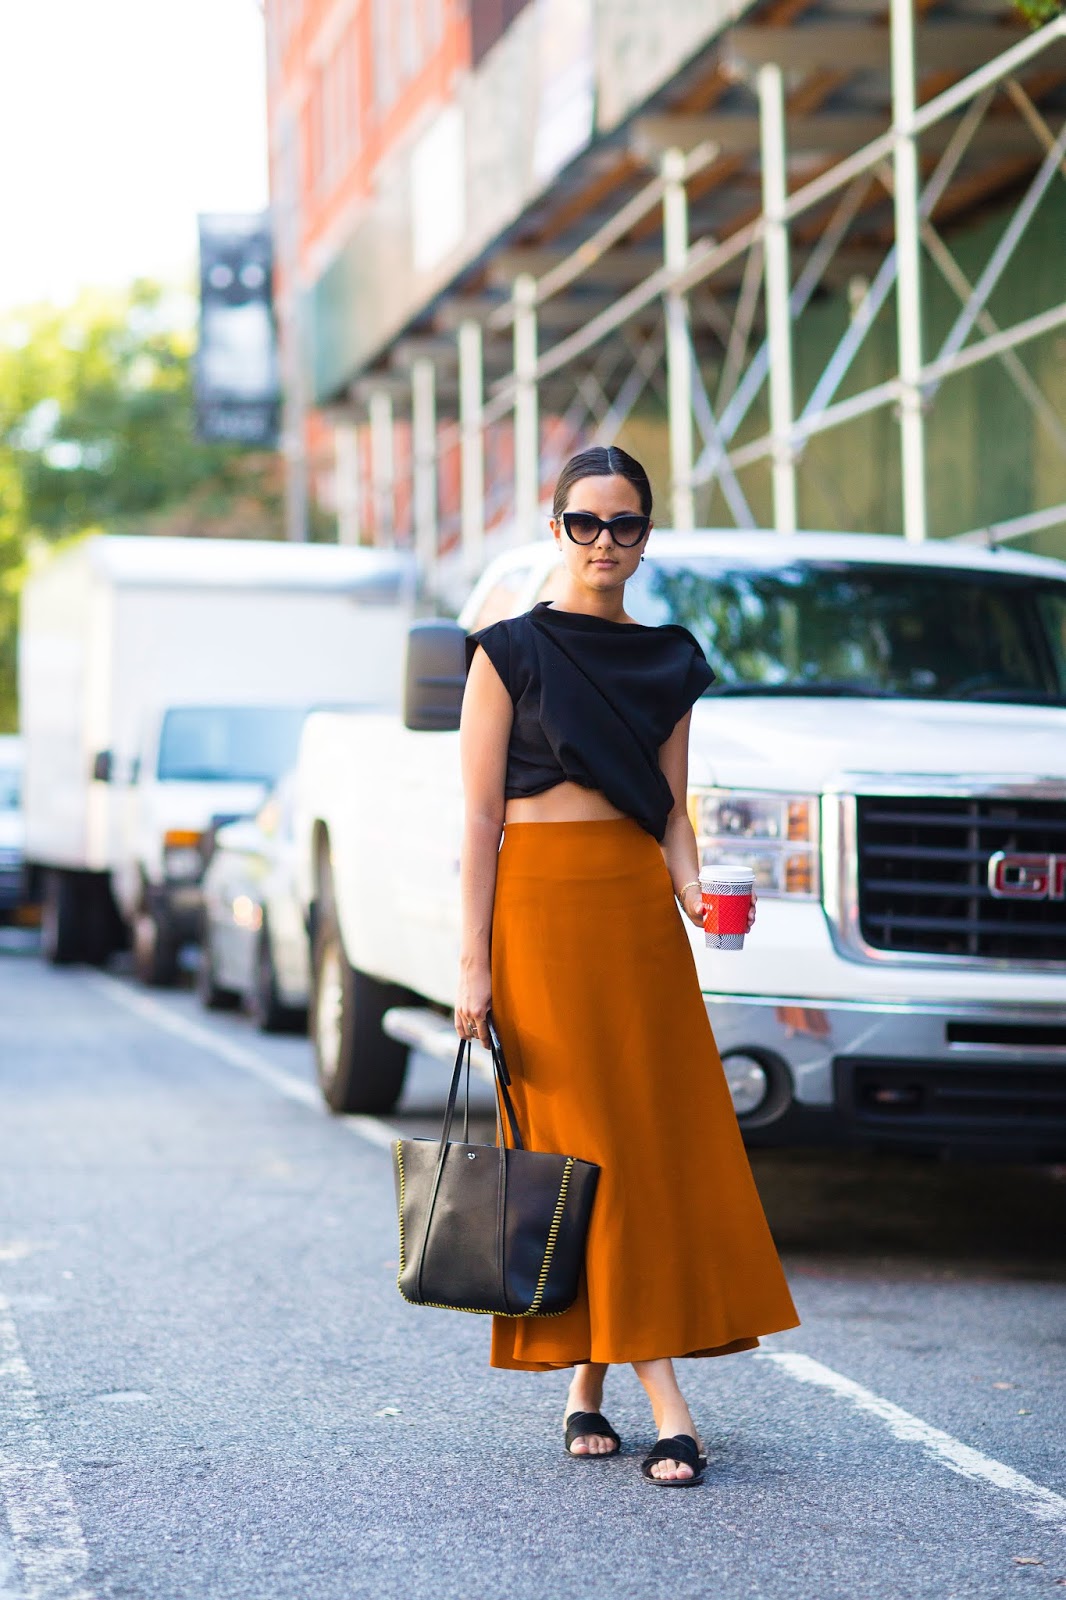 How to Wear a Bright Skirt for Summer